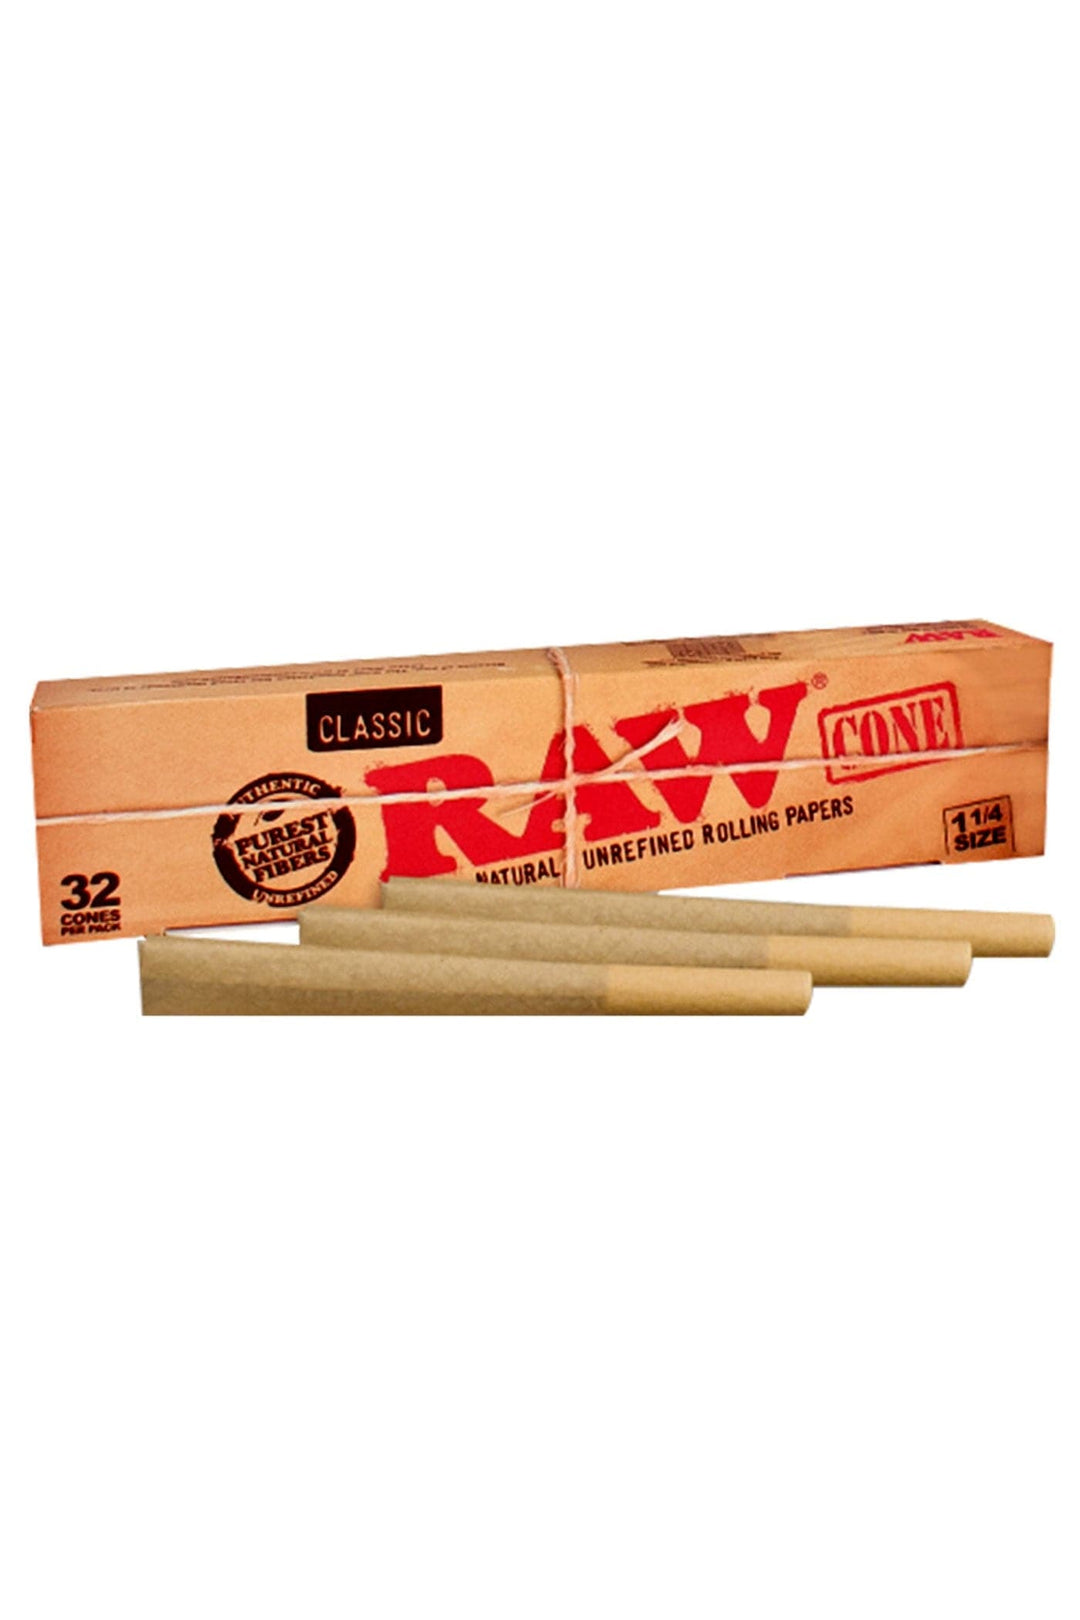 RAW PRE-ROLLED CONE 11/4 – 32/PACK